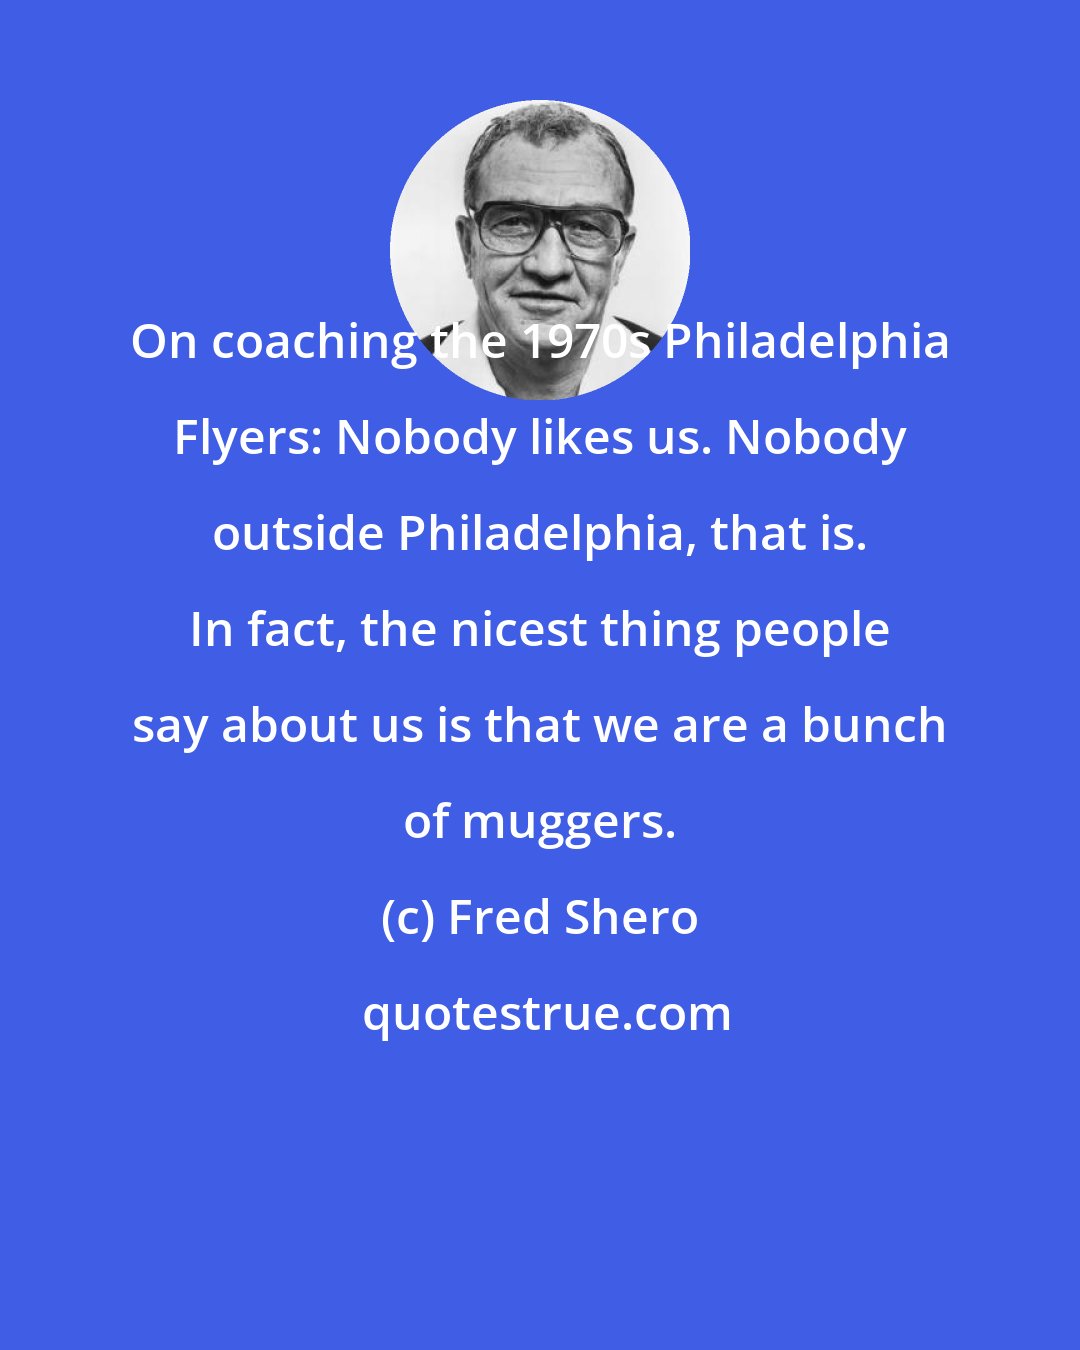 Fred Shero: On coaching the 1970s Philadelphia Flyers: Nobody likes us. Nobody outside Philadelphia, that is. In fact, the nicest thing people say about us is that we are a bunch of muggers.